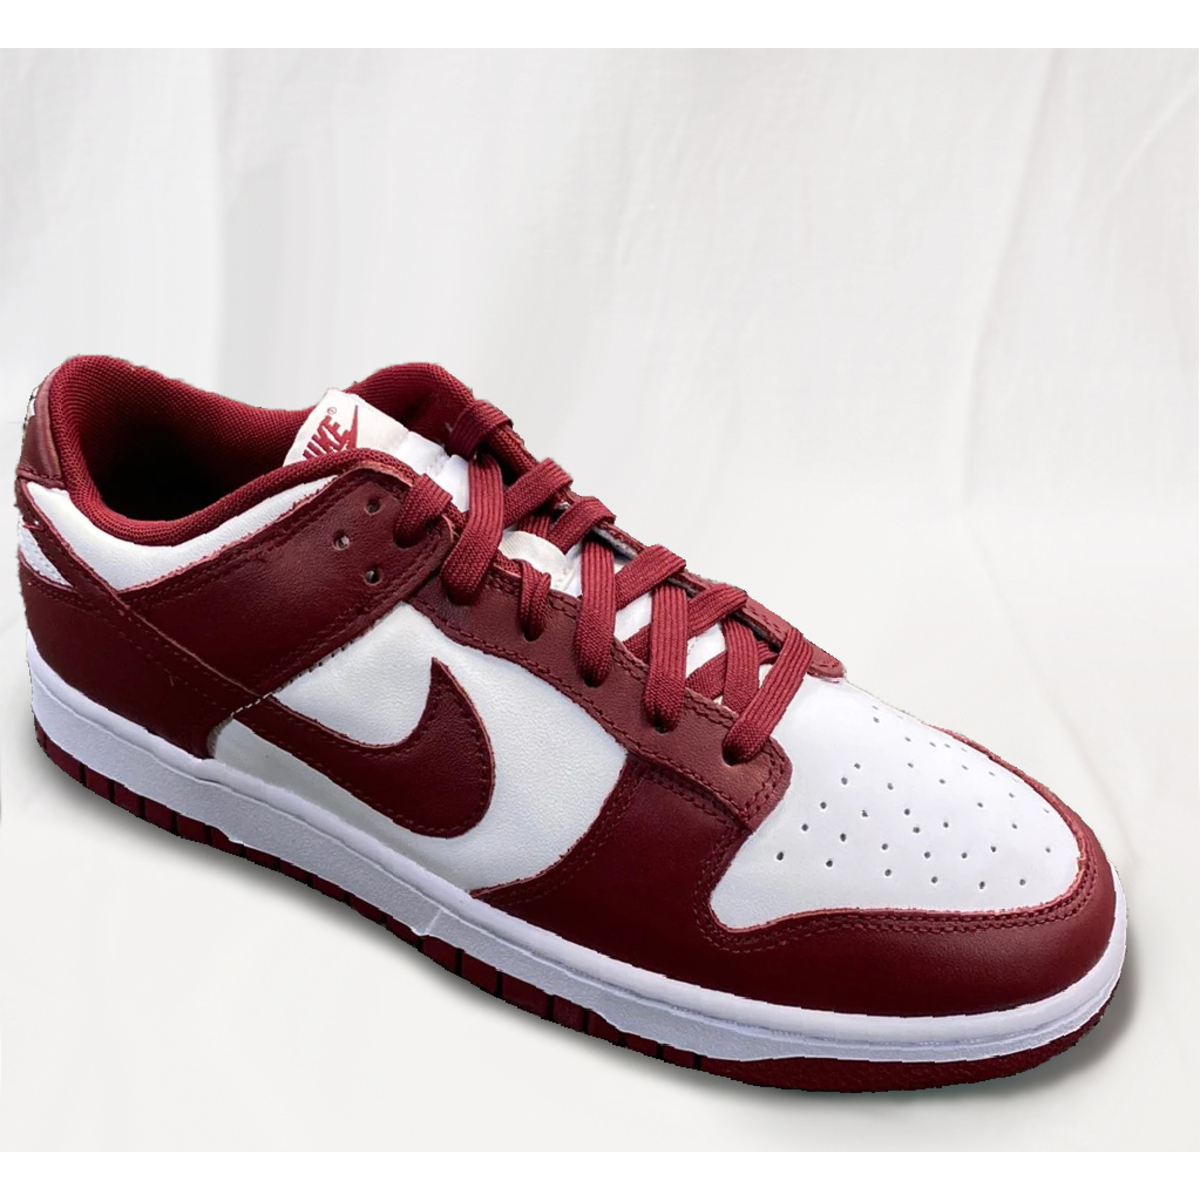 Nike Bordeaux Nike Dunk Low Team Red - DD1391-601 - Taille : 42.5 FR flv4p9u5